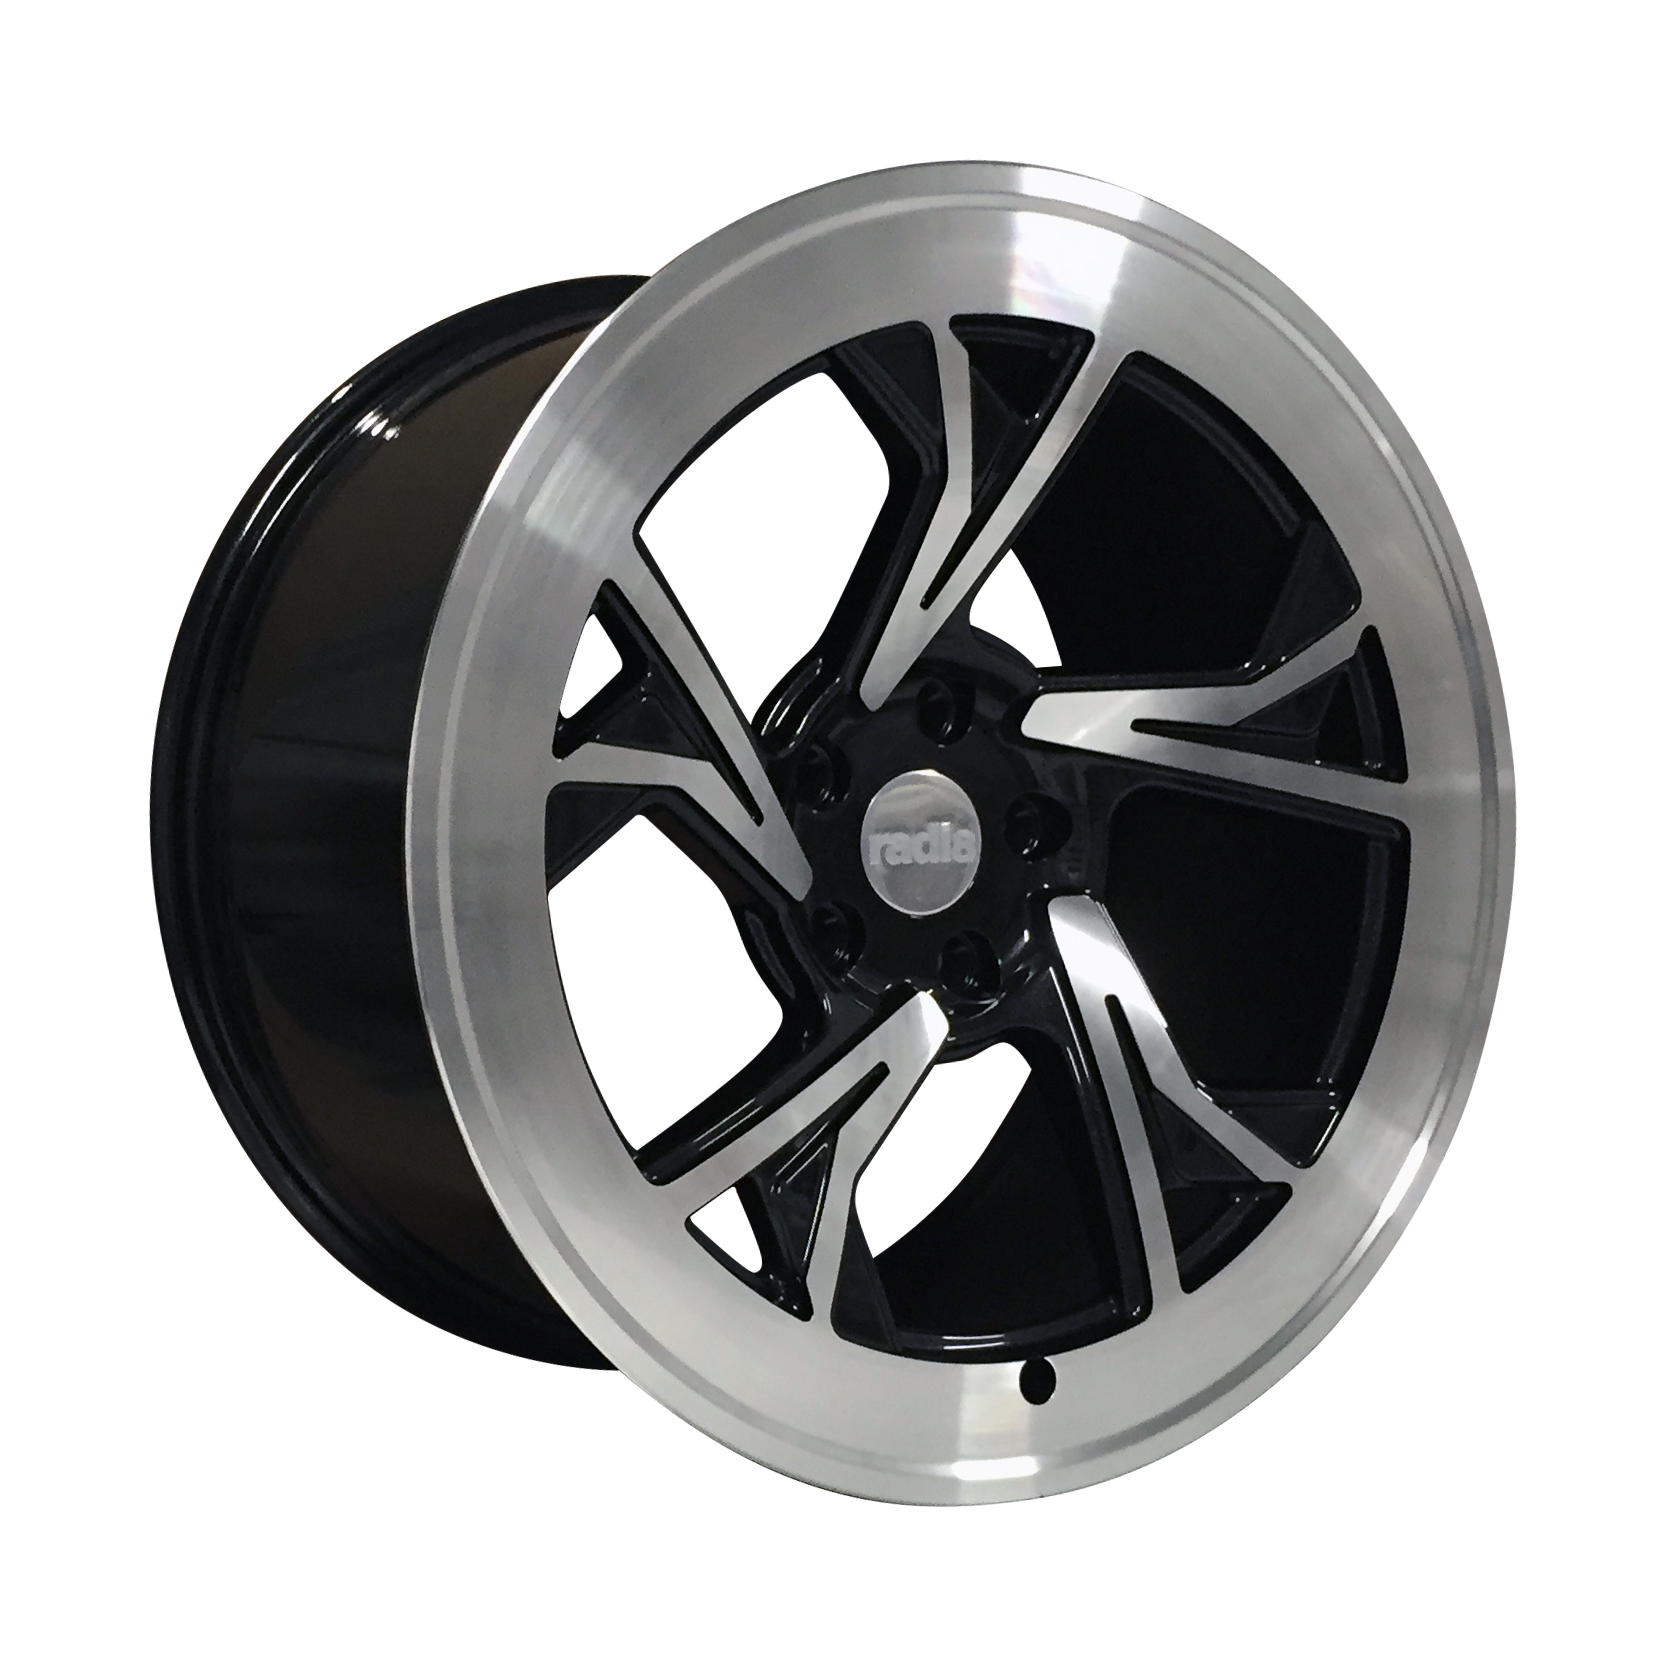 NEW 19  RADI8 R8C5 ALLOY WHEELS IN GLOSS BLACK WITH POLISHED FACE  WIDER 10  REARS